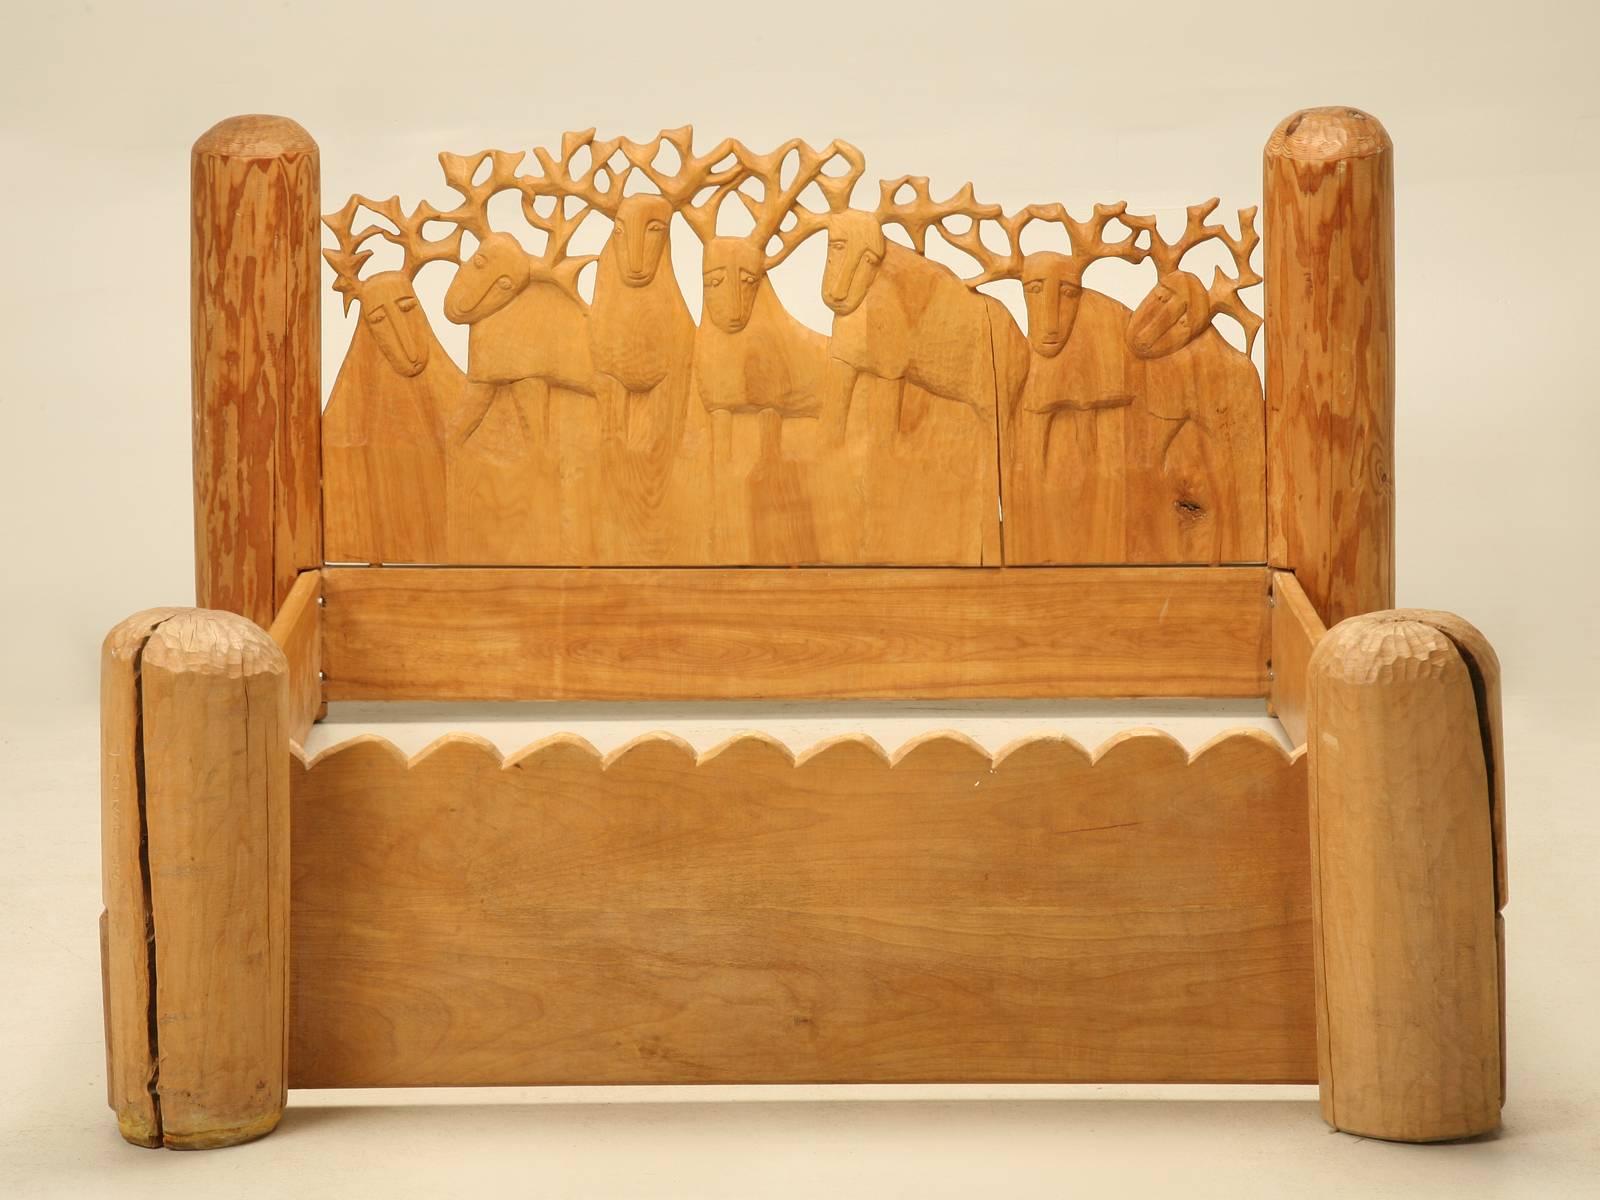 Maybe one of my all-time favorite beds which was hard-carved by the noted sculptor Jerzy Kenar, about 30 years ago. We probably should have named it; “Seven Stags” because there are seven stags carved to form the headboard. The bed takes a standard